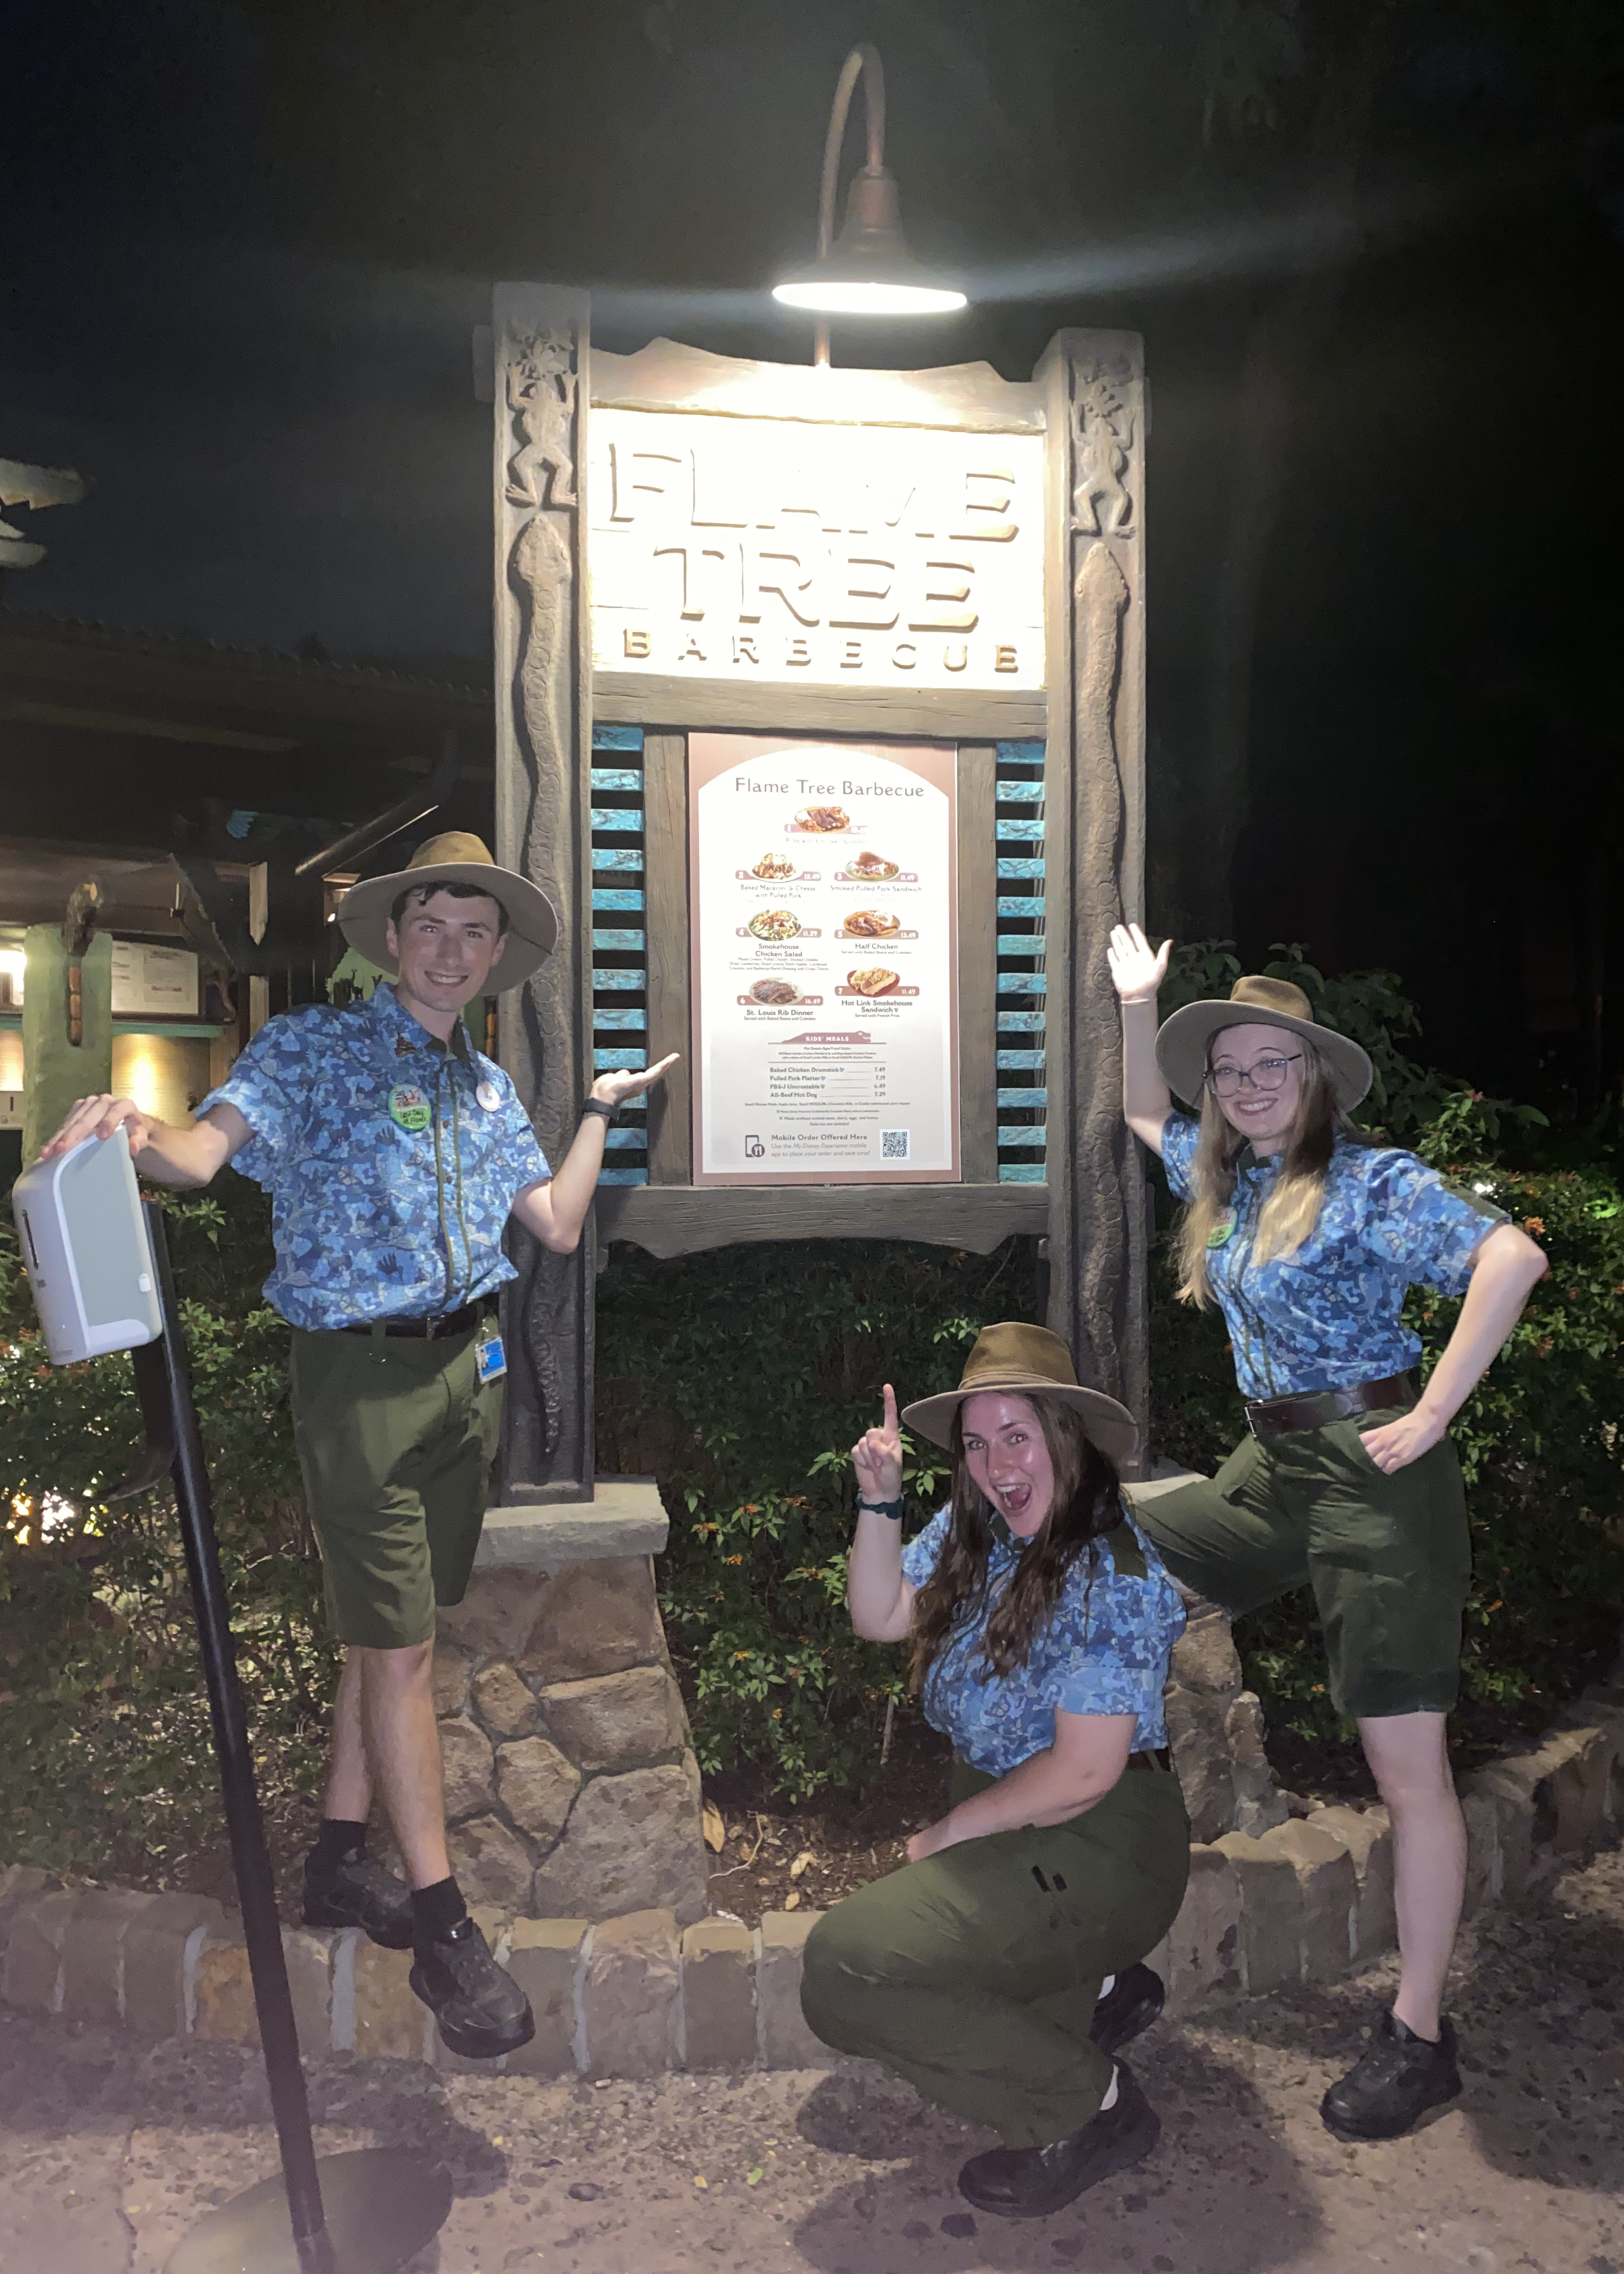 “The best part of the Disney College Program is all of the amazing participants you get to work with! I’m keeping in touch with all of my friends, and I don’t know how magical the experience would have been without them!” – Emily